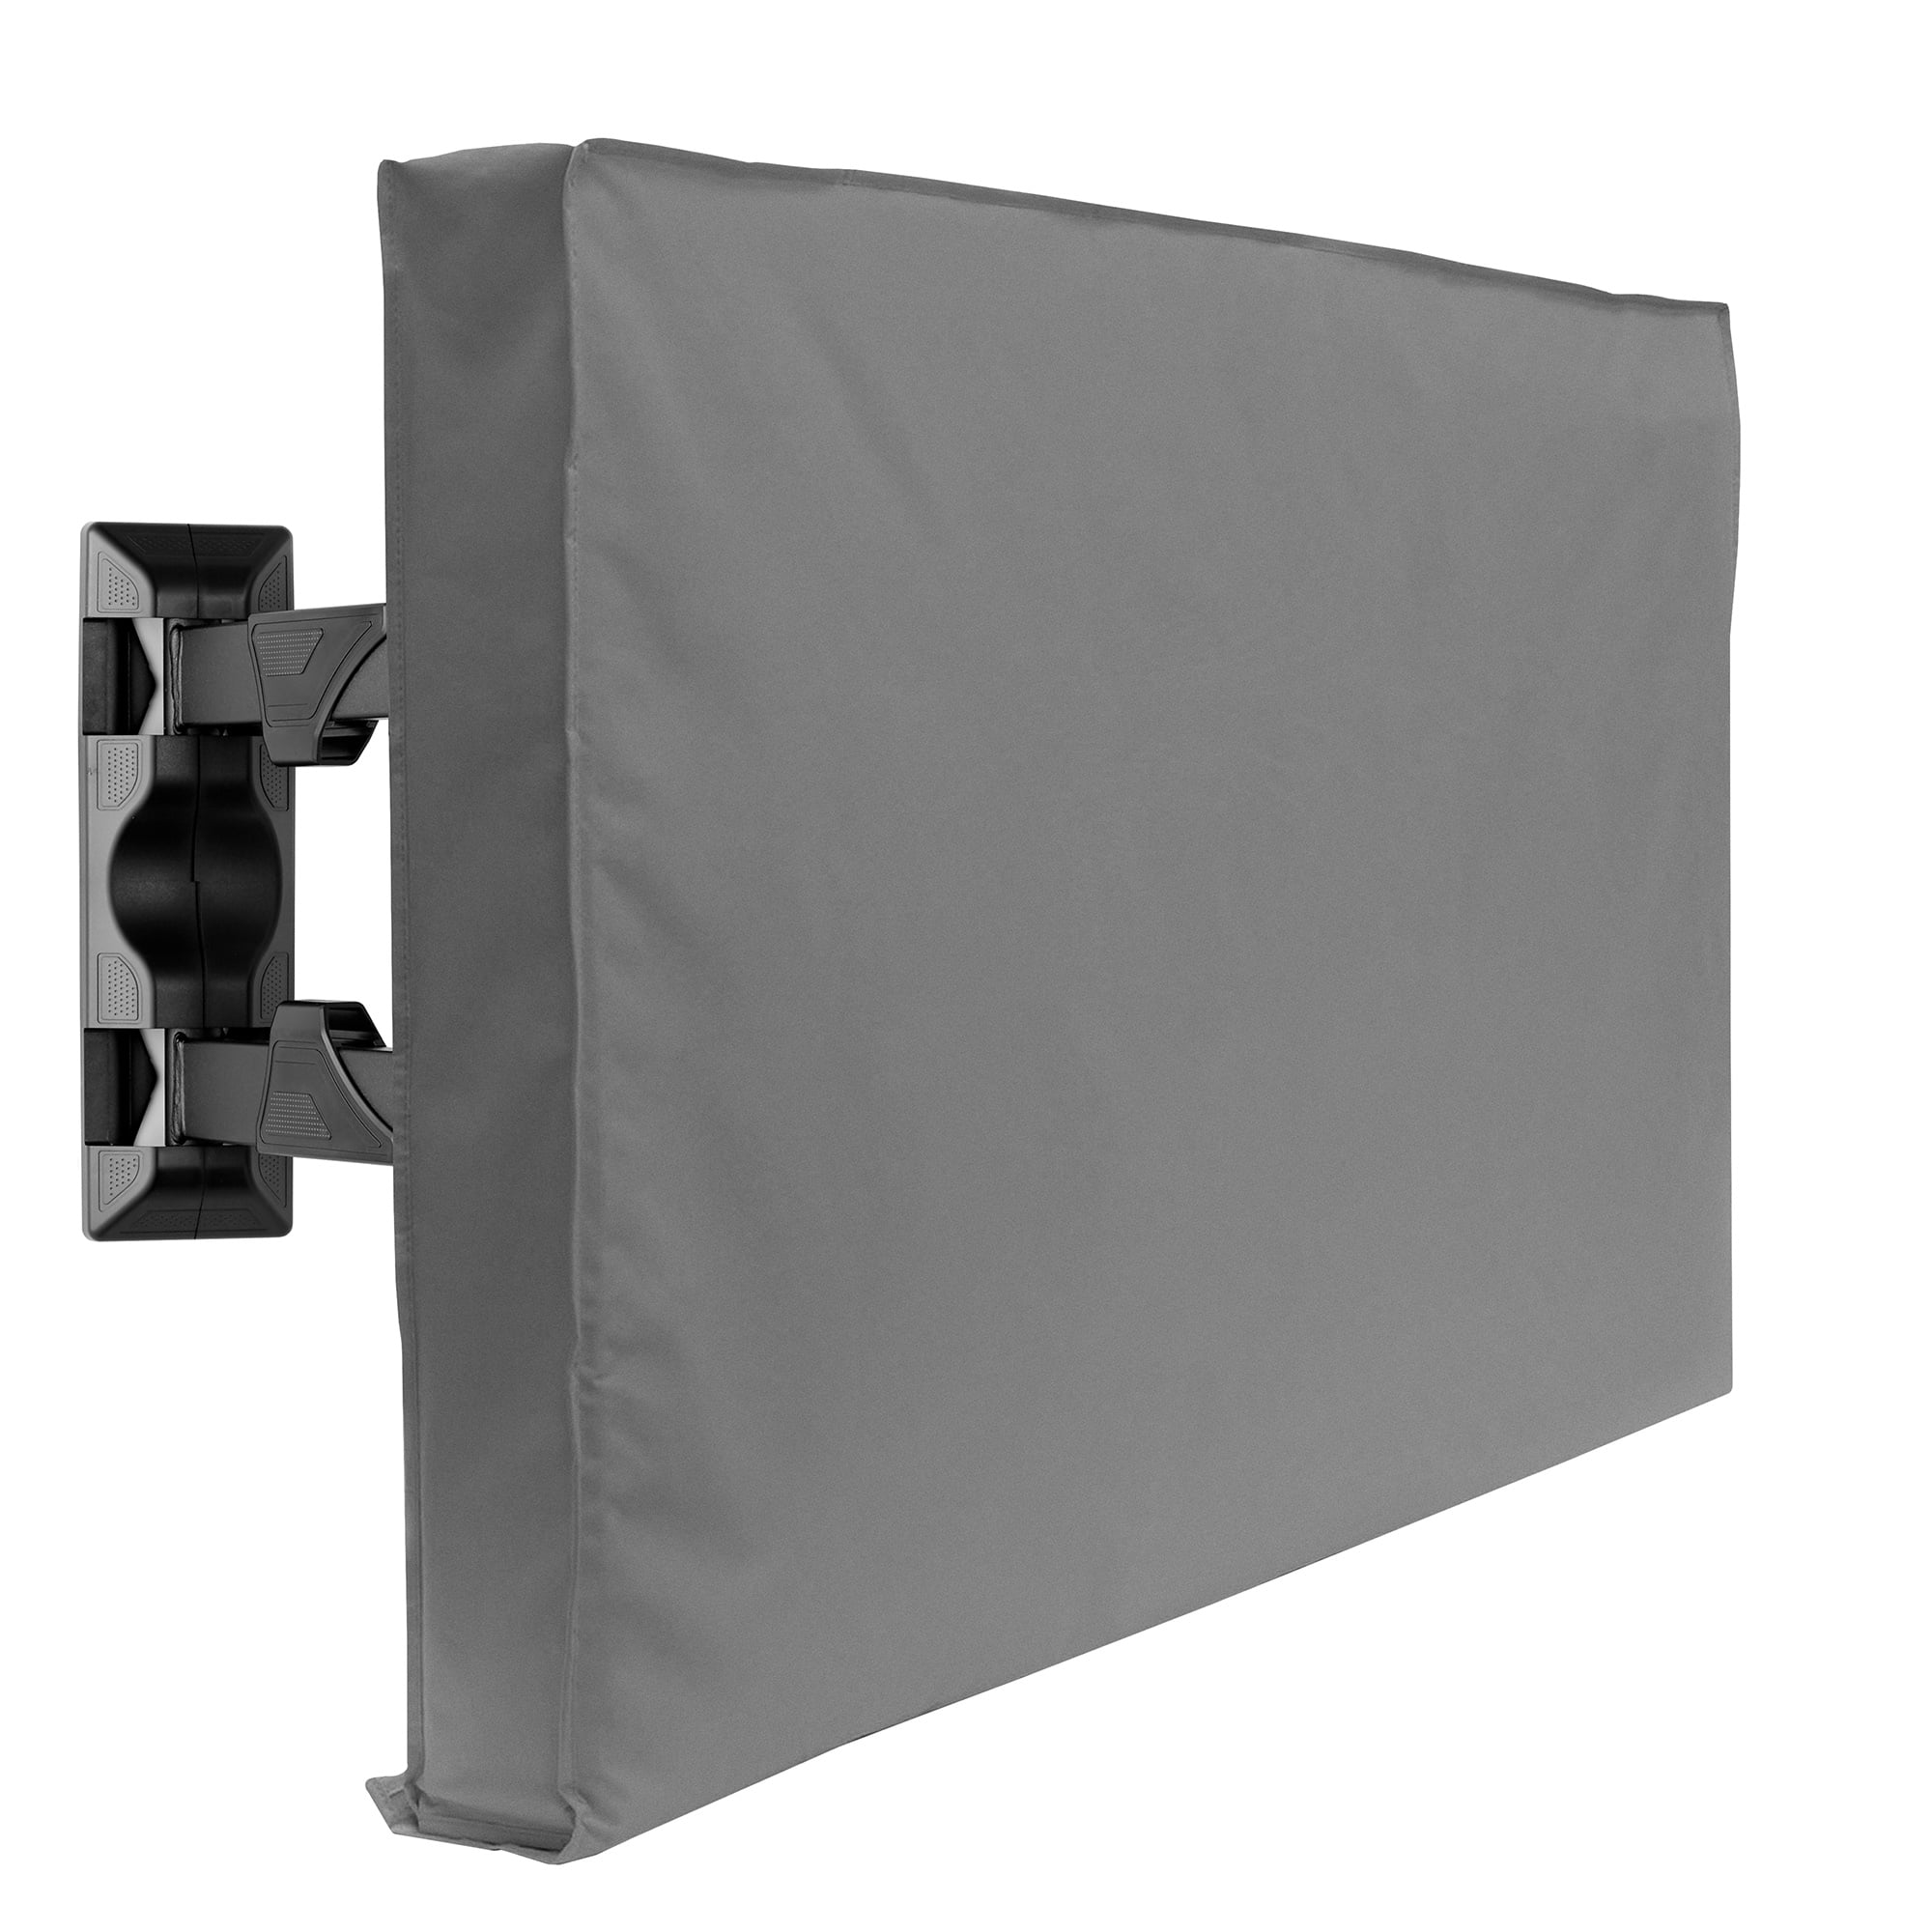 Protect Your TV Now! Outdoor TV Covers 58-60 The Weatherproof and Dust-Proof Material with Free Microfiber Cloth with Bottom Cover 